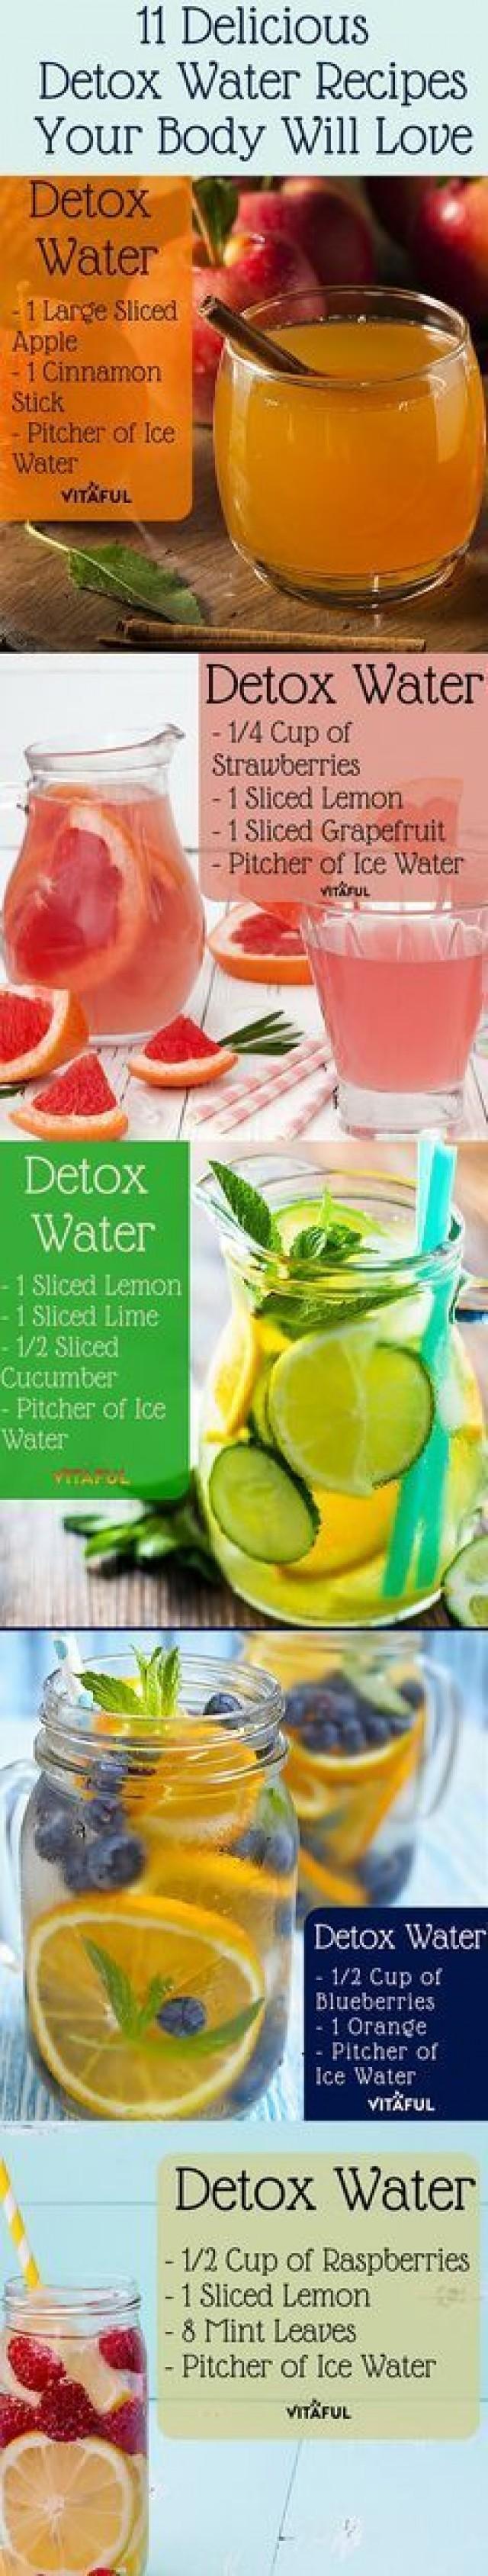 11 Delicious Detox Water Recipes Your Body Will Love